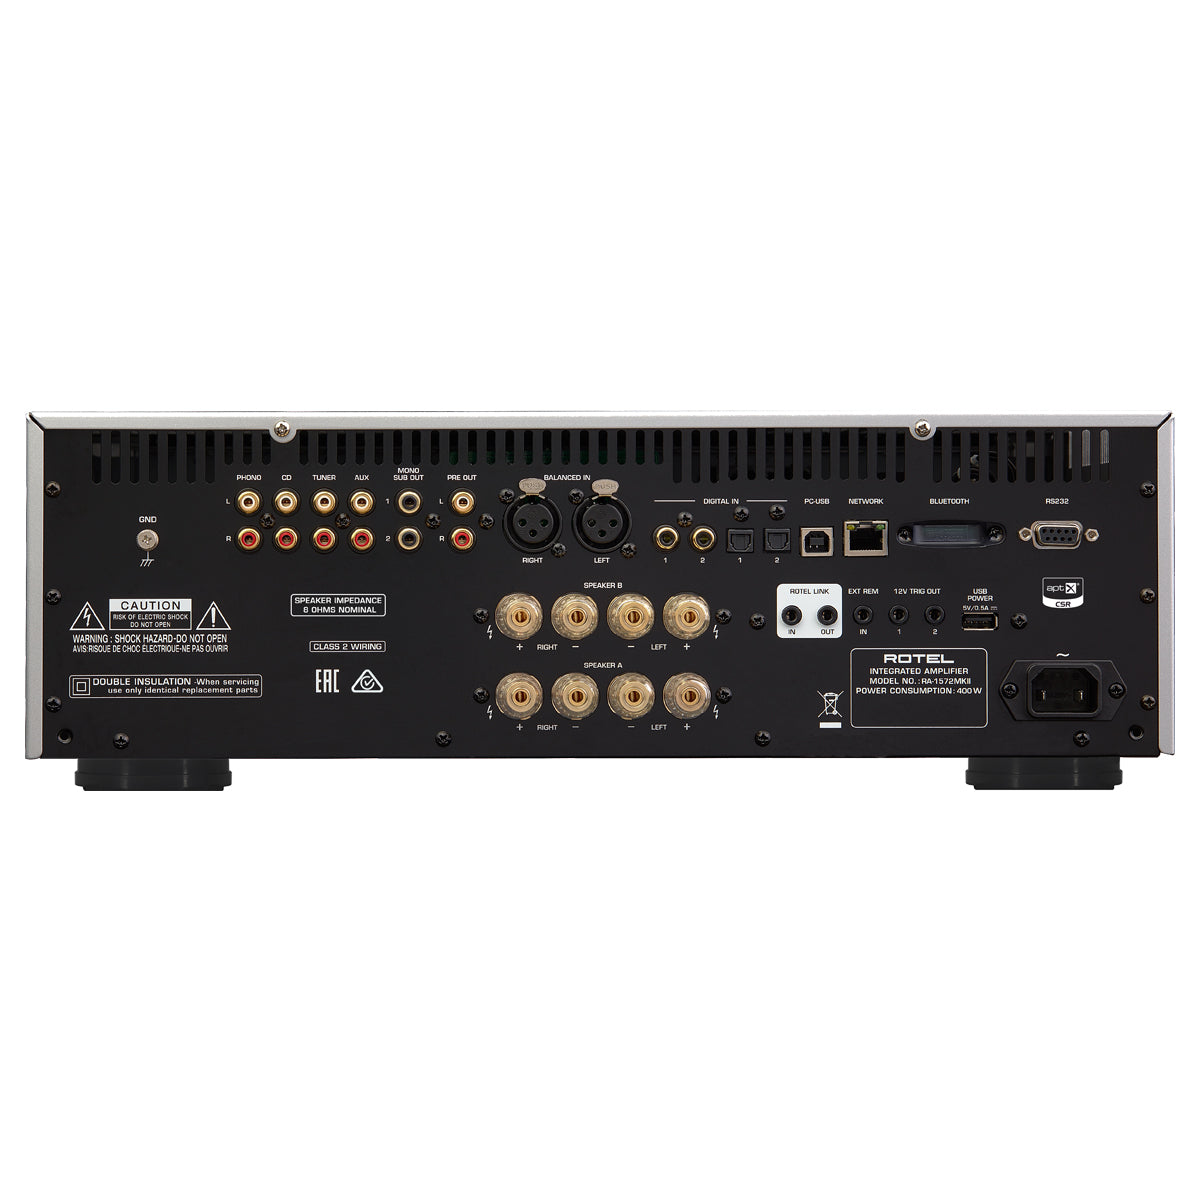 Rotel RA1572 MKII Integrated Amplifier - Black - The Audio Experts